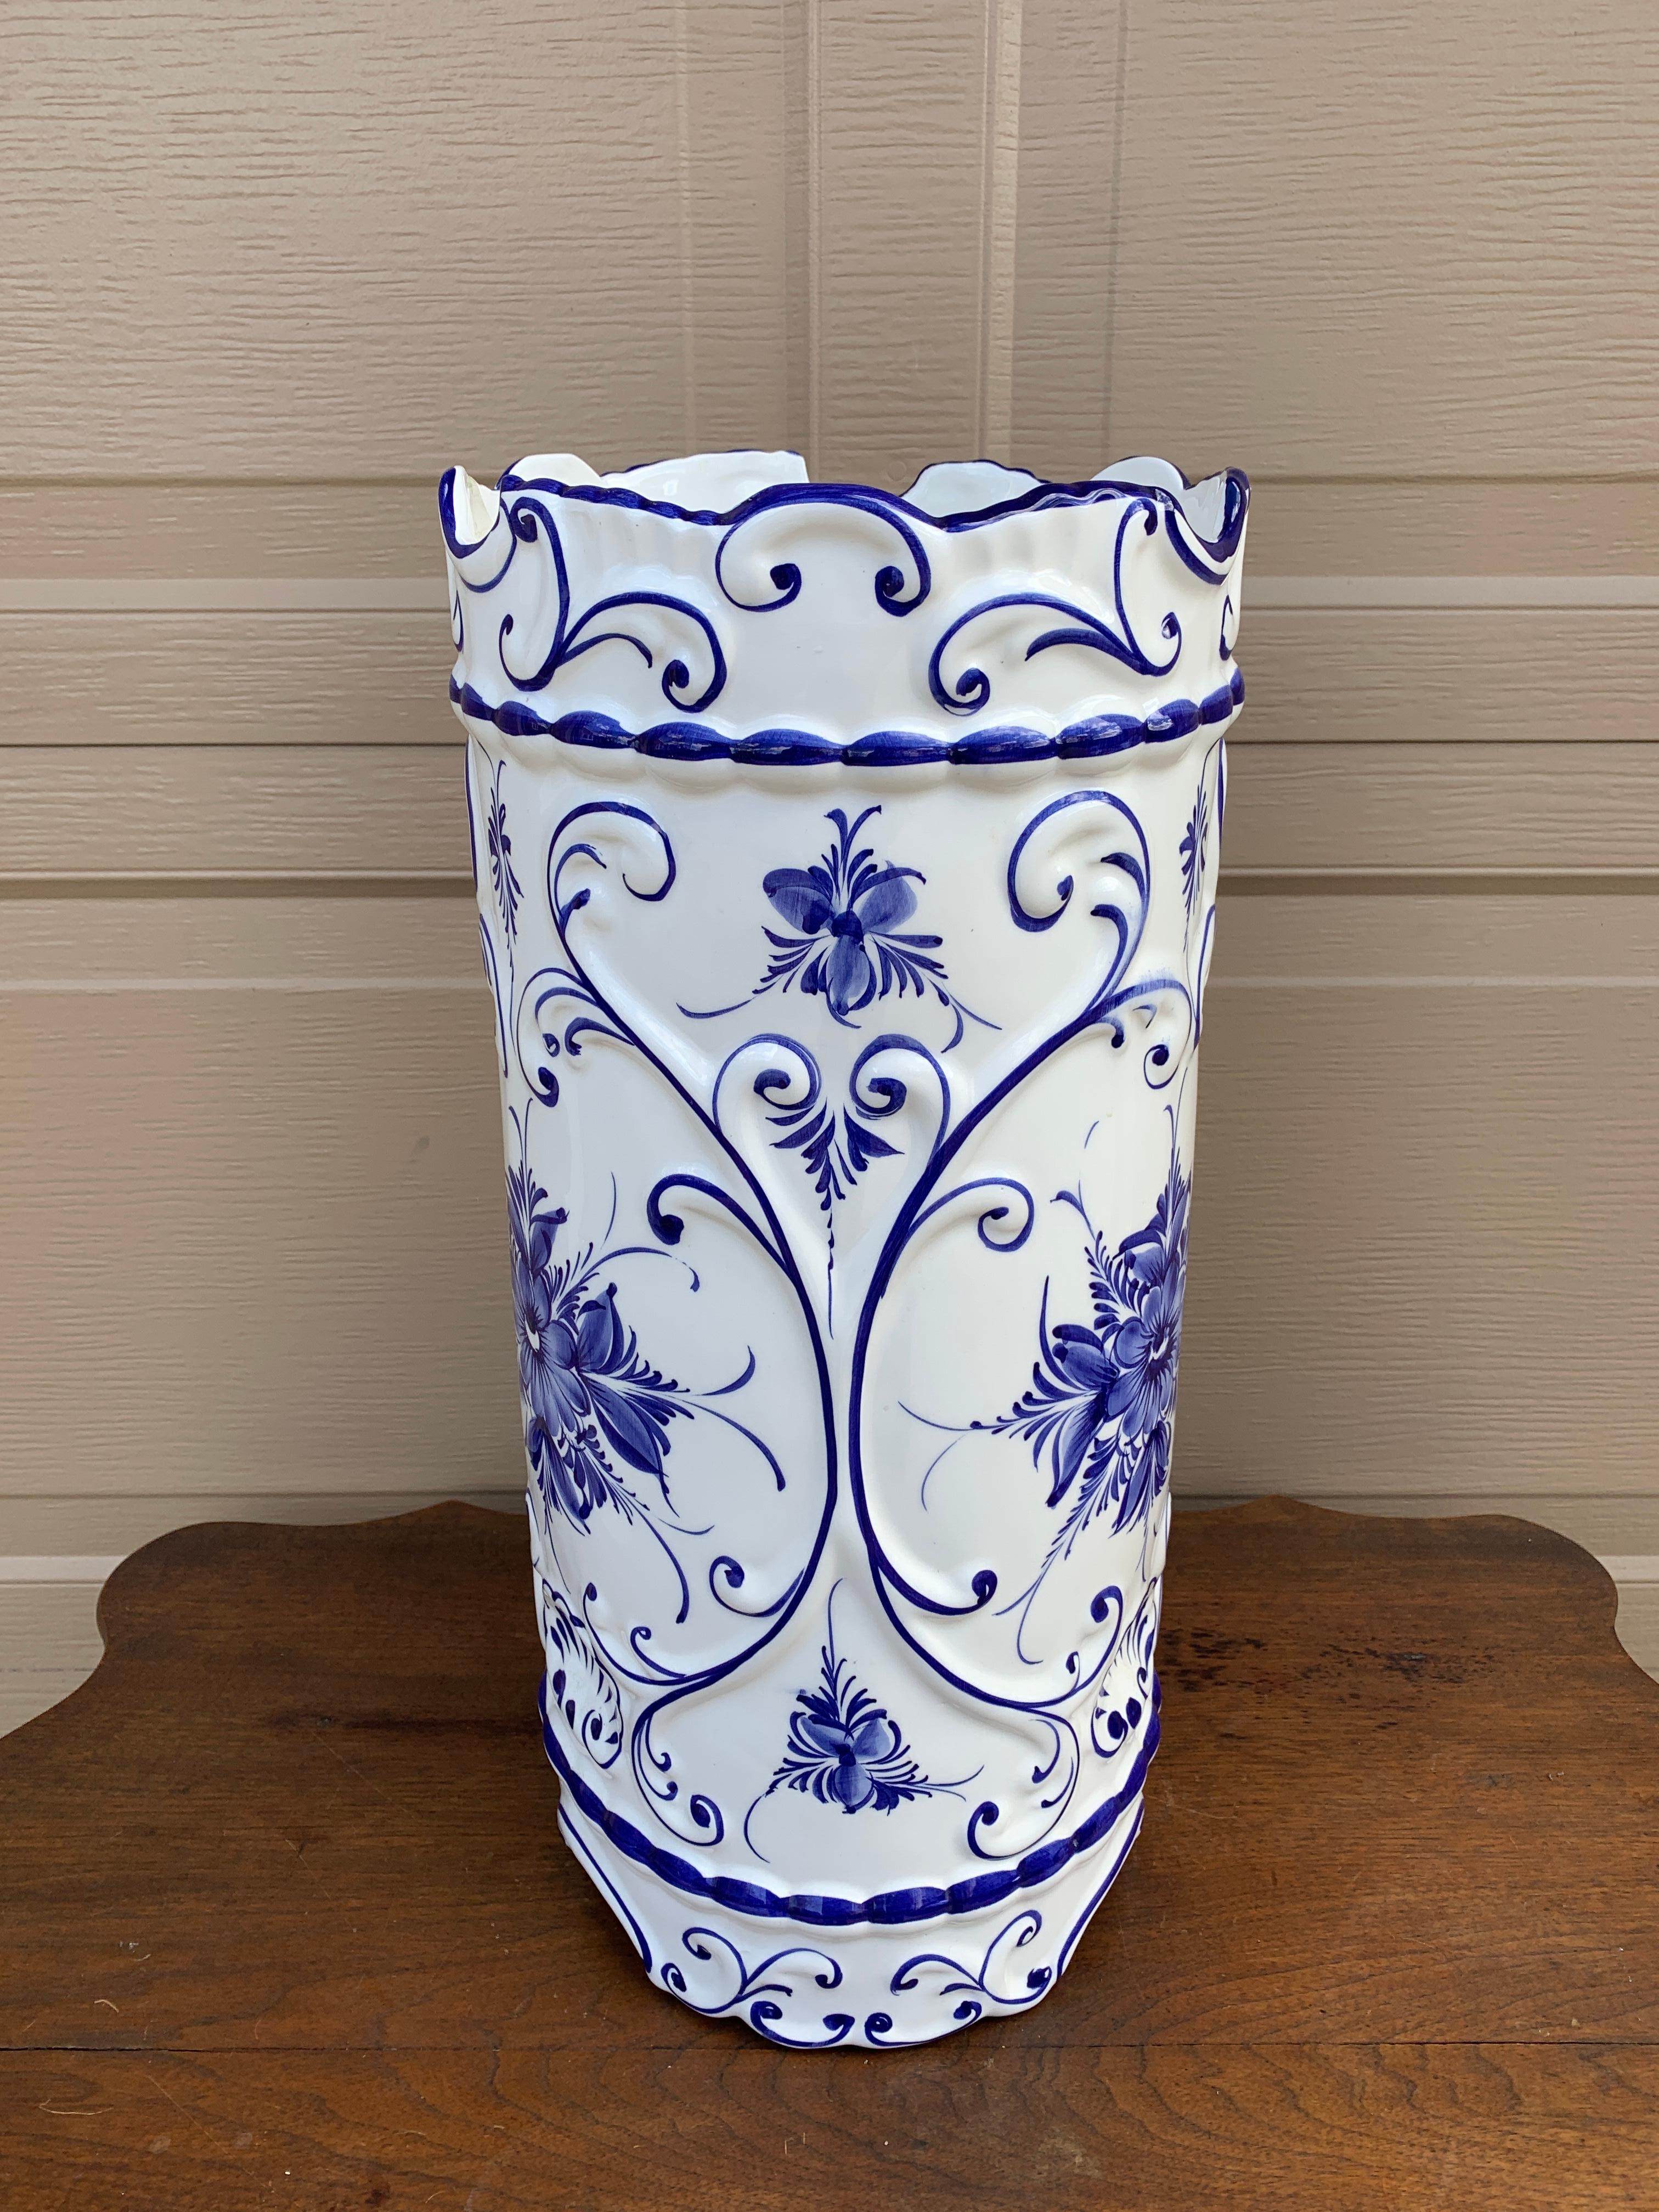 Vintage Portuguese Blue and White Porcelain Umbrella Stand In Good Condition For Sale In Elkhart, IN